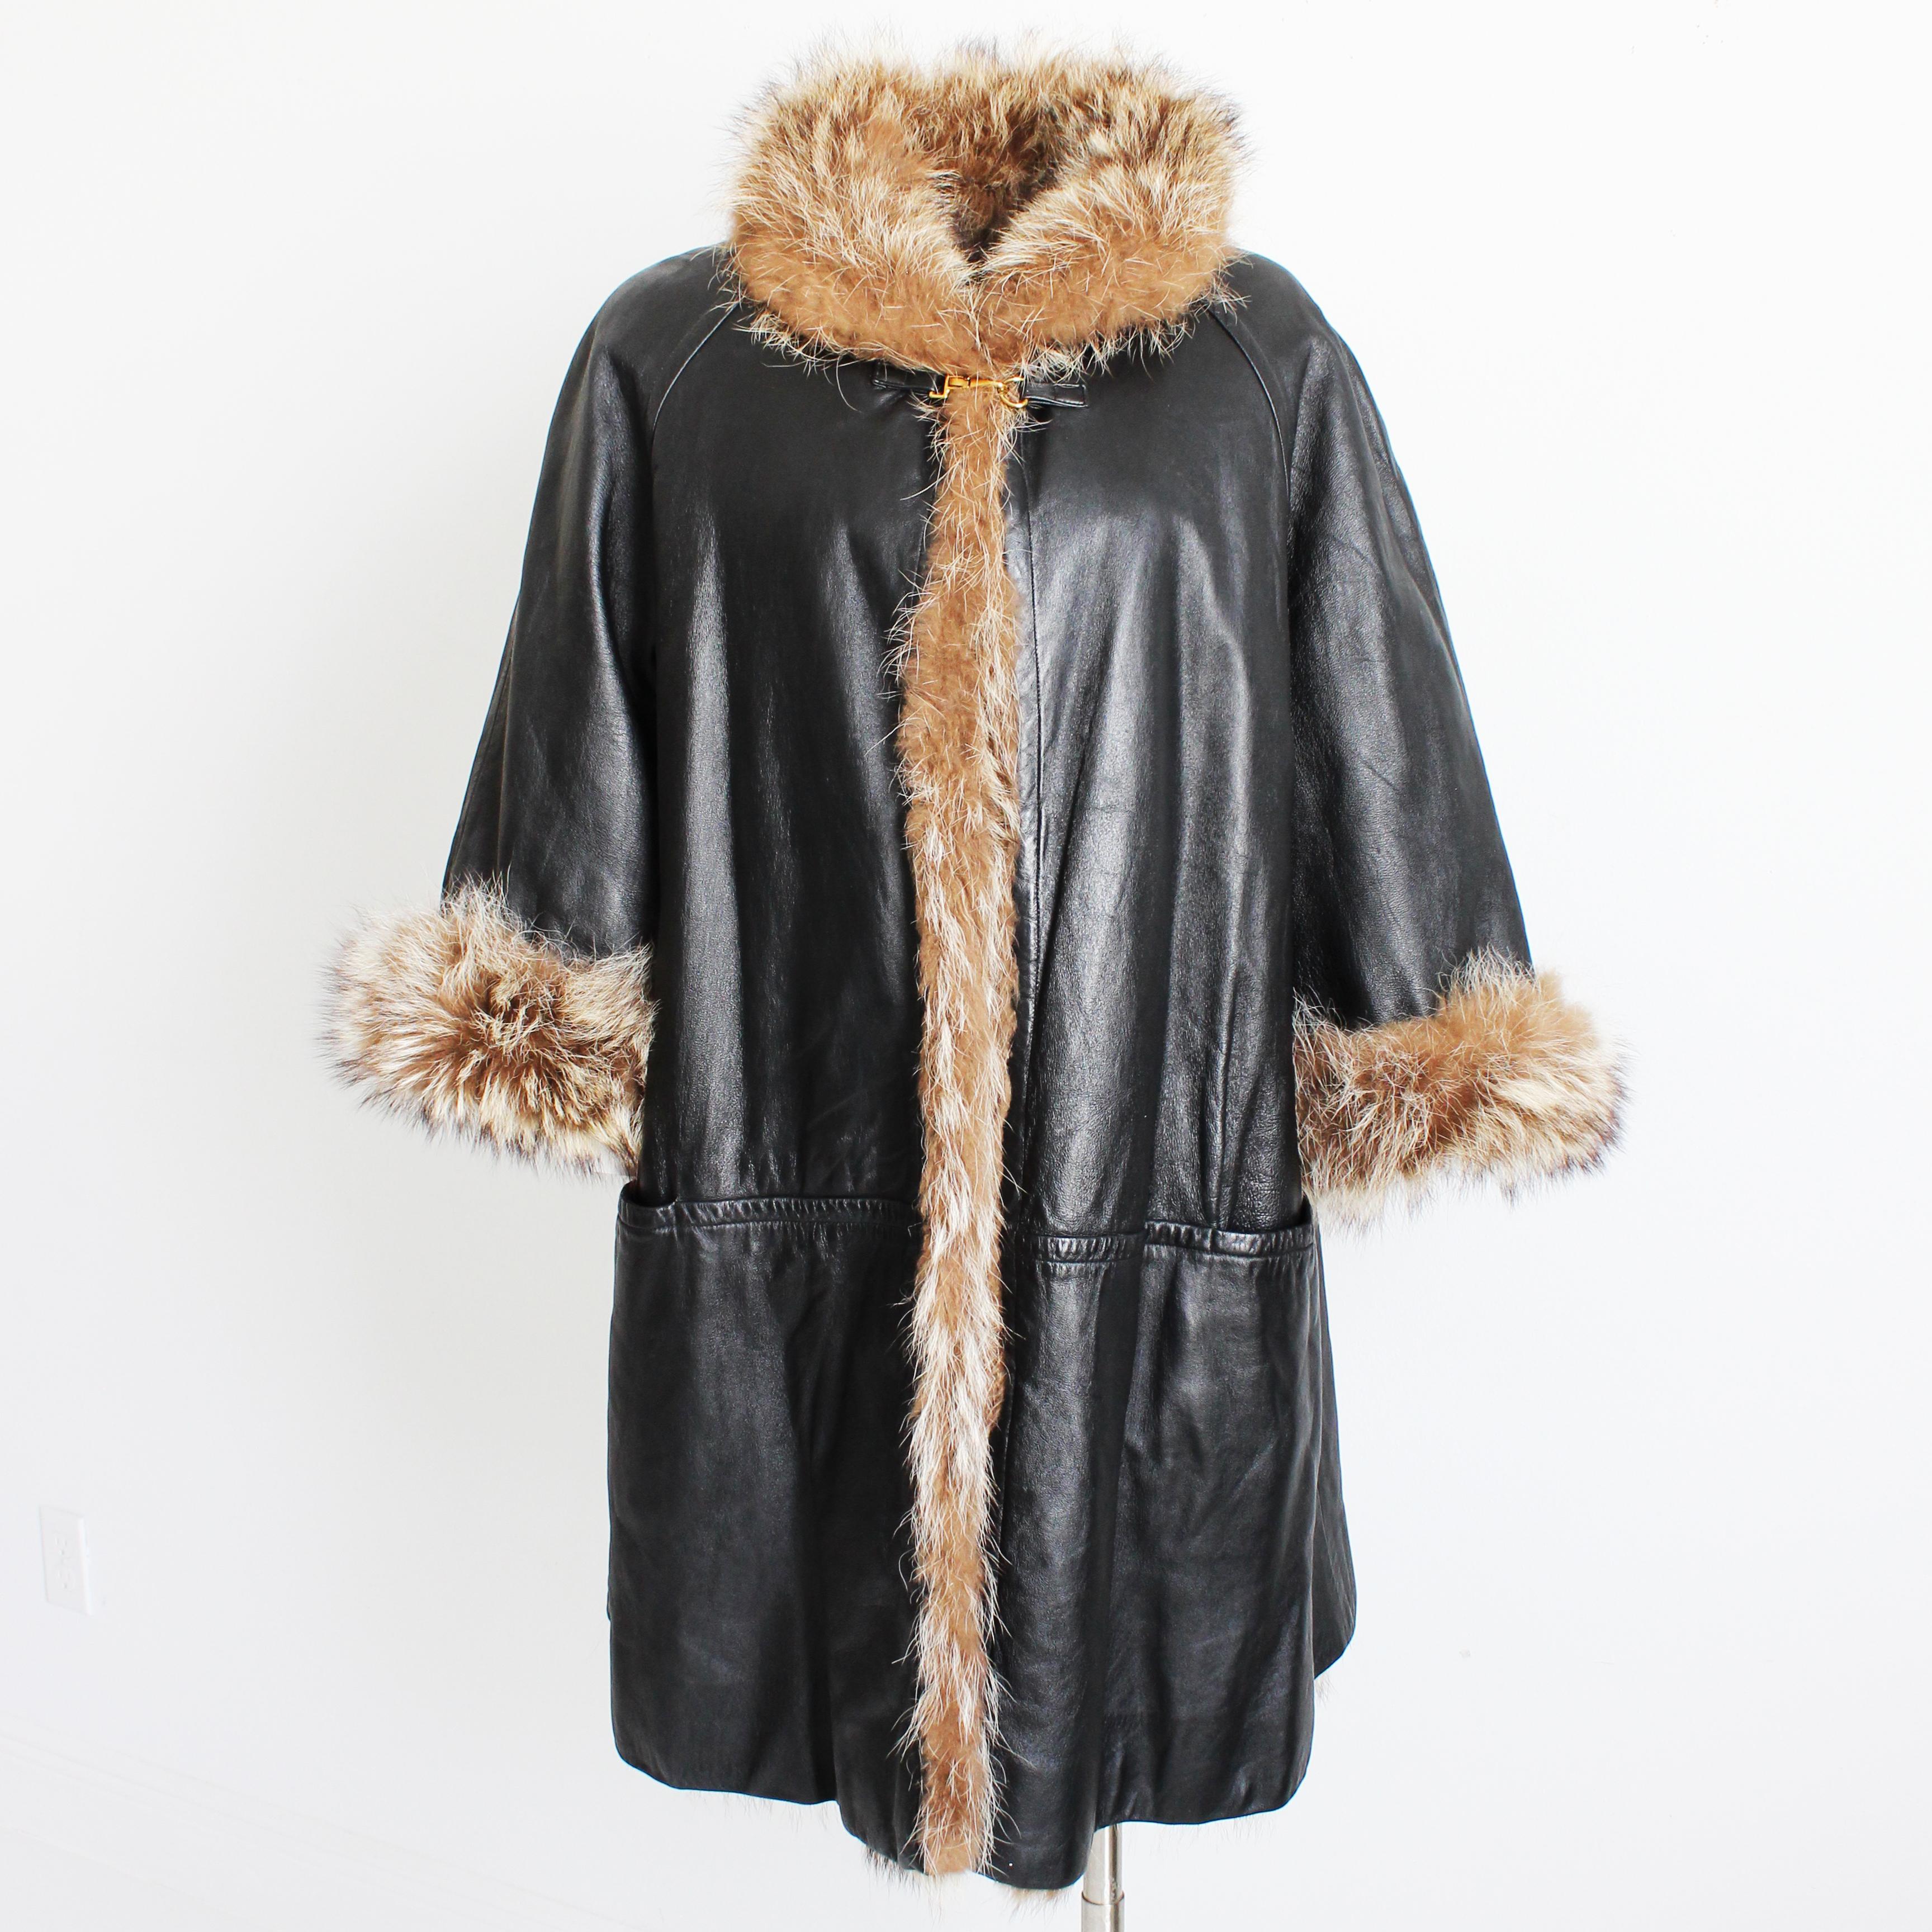 Vintage, preowned & authentic Bonnie Cashin for Sills Reversible Black Leather and Raccoon Fur Coat. 

This fabulous coat features gorgeous black leather on one side, soft raccoon fur on the other!  It fastens with a dog leash fastener at the collar